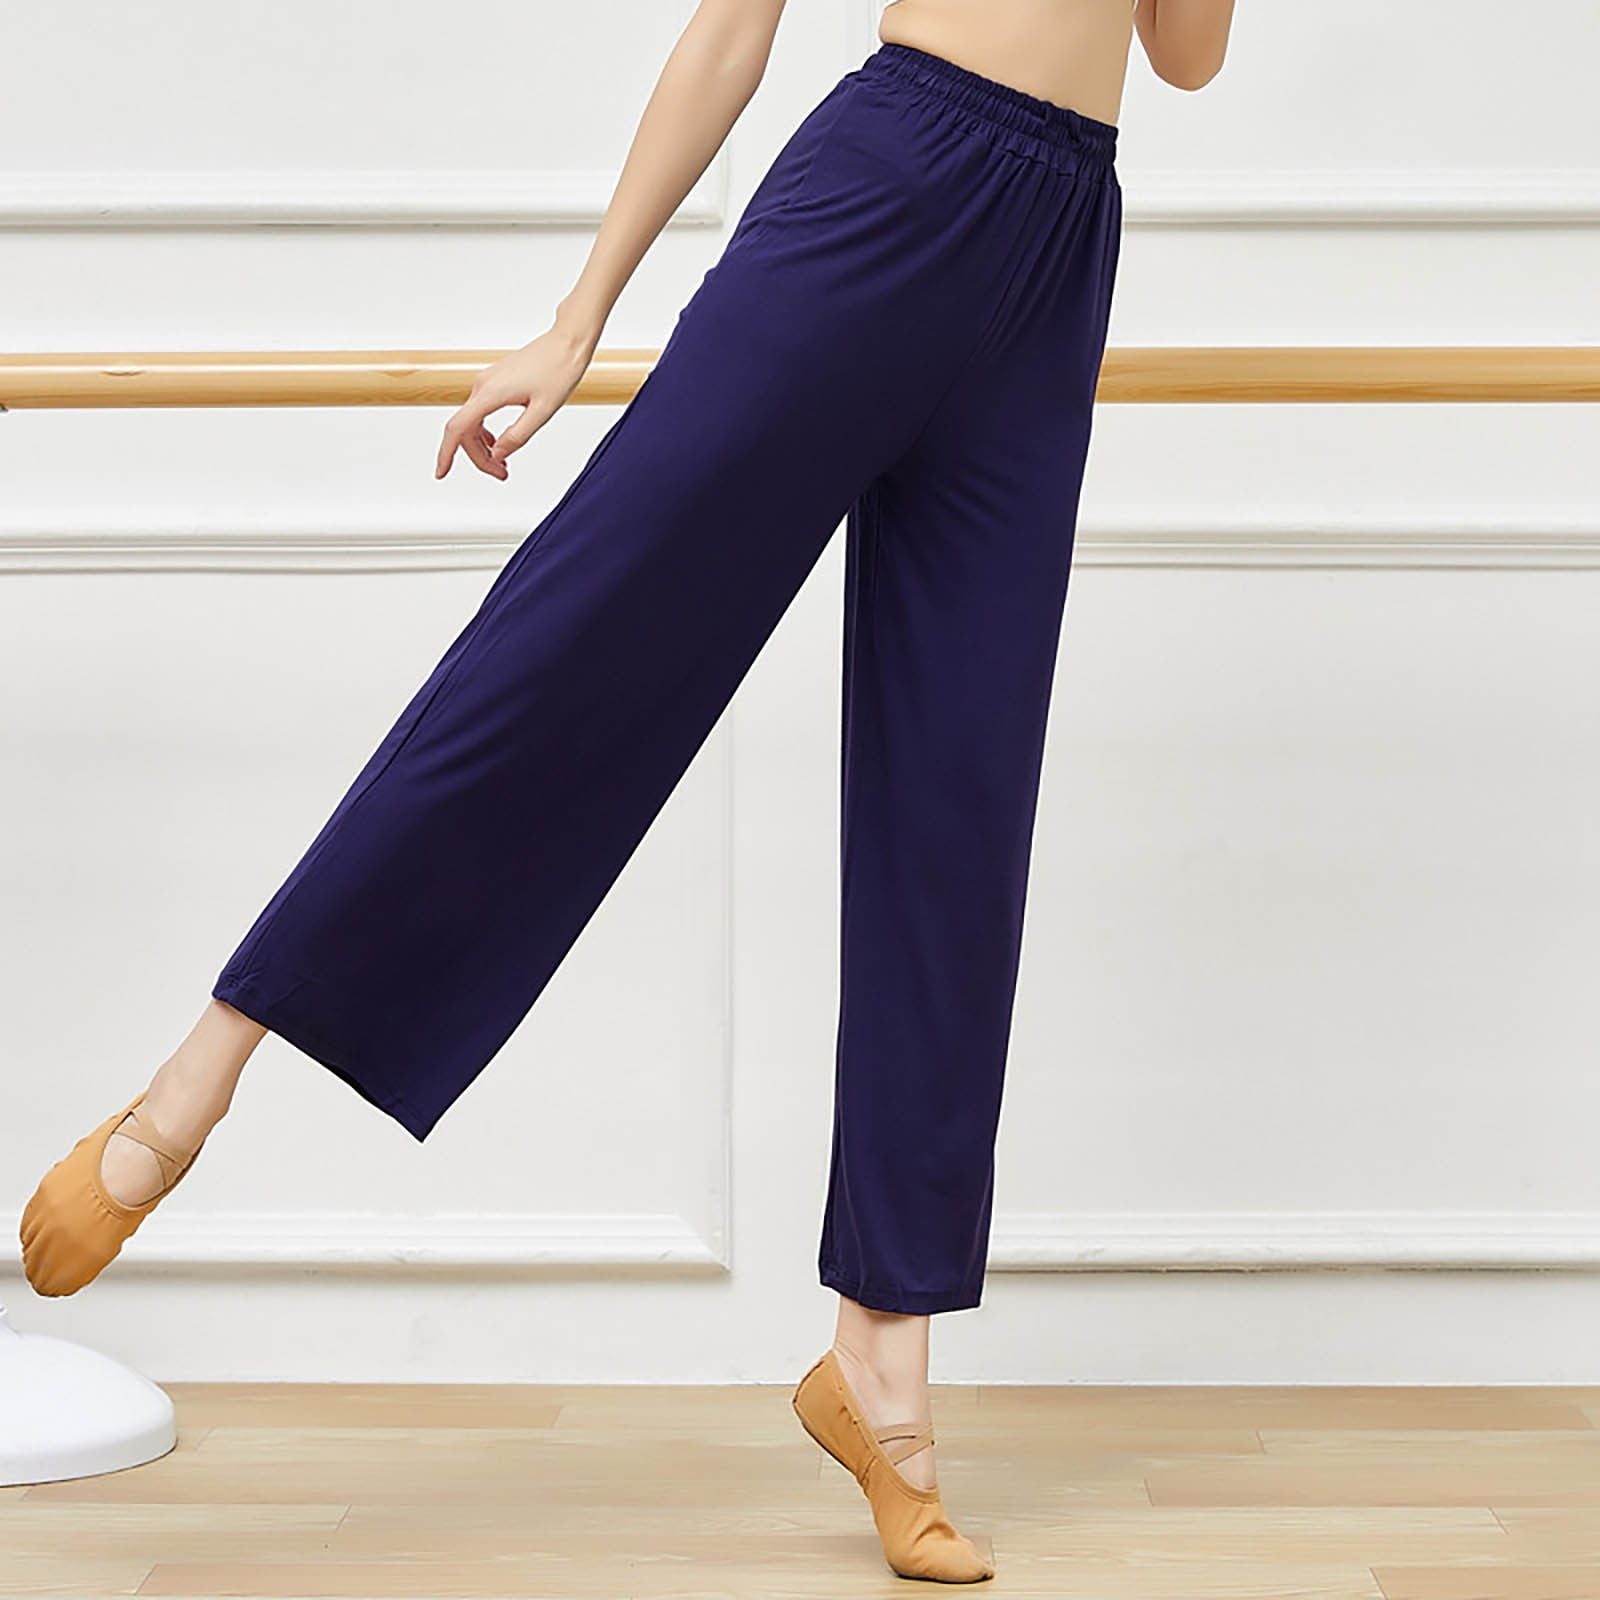 Are yoga pants the new jeans? How trend-led workout clothes are